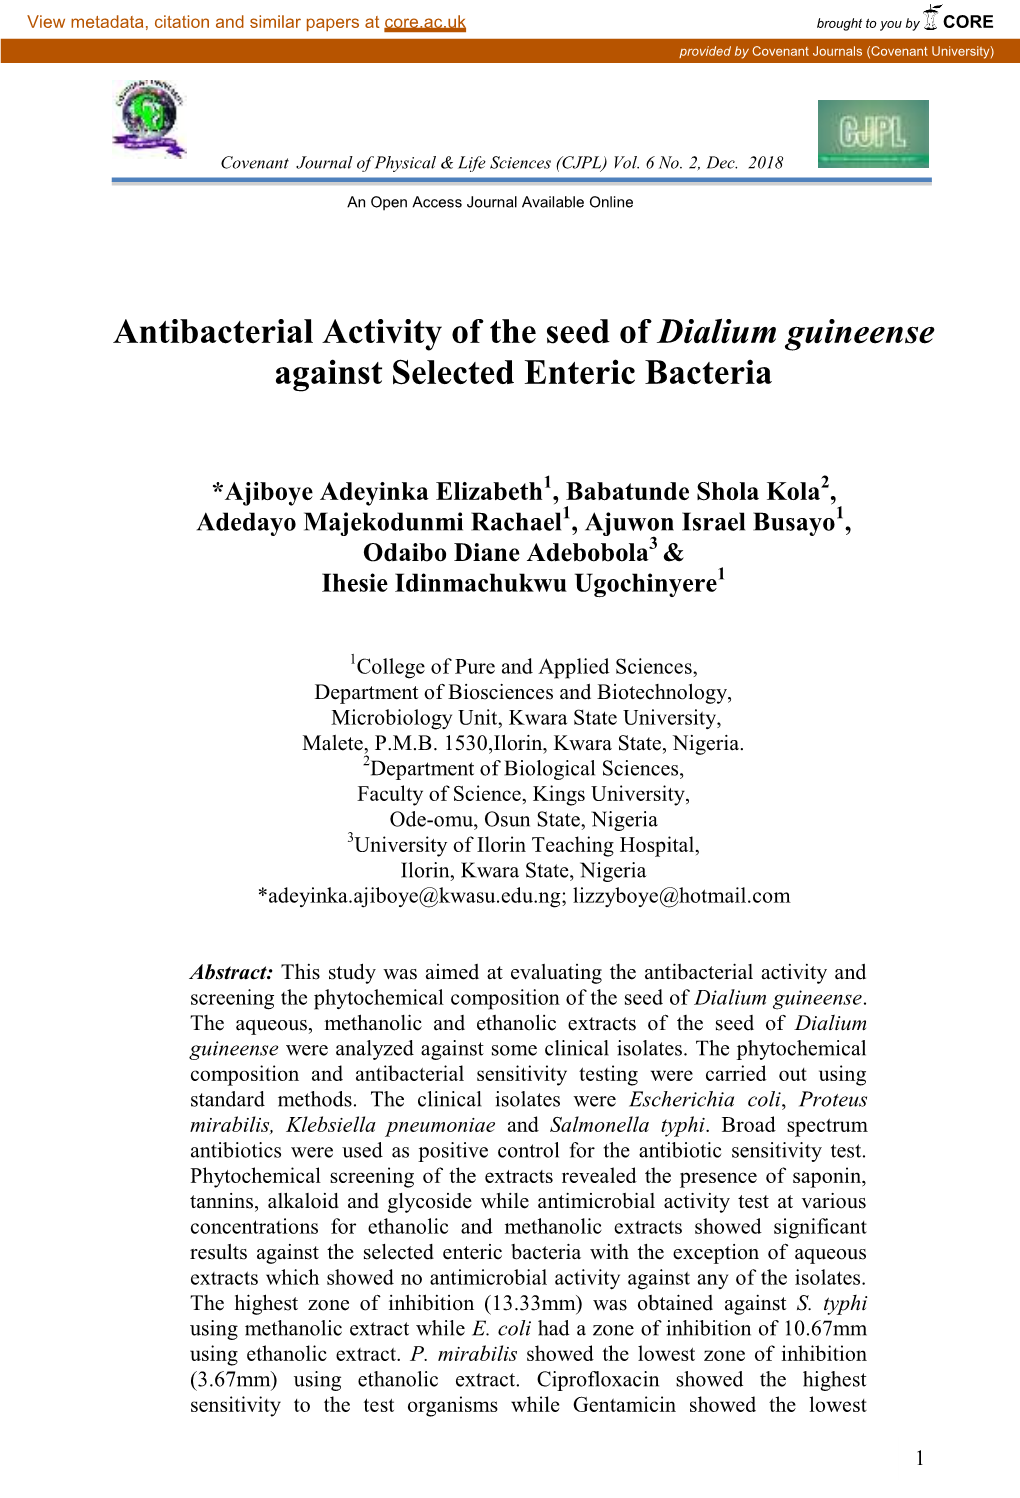 Antibacterial Activity of the Seed of Dialium Guineense Against Selected Enteric Bacteria